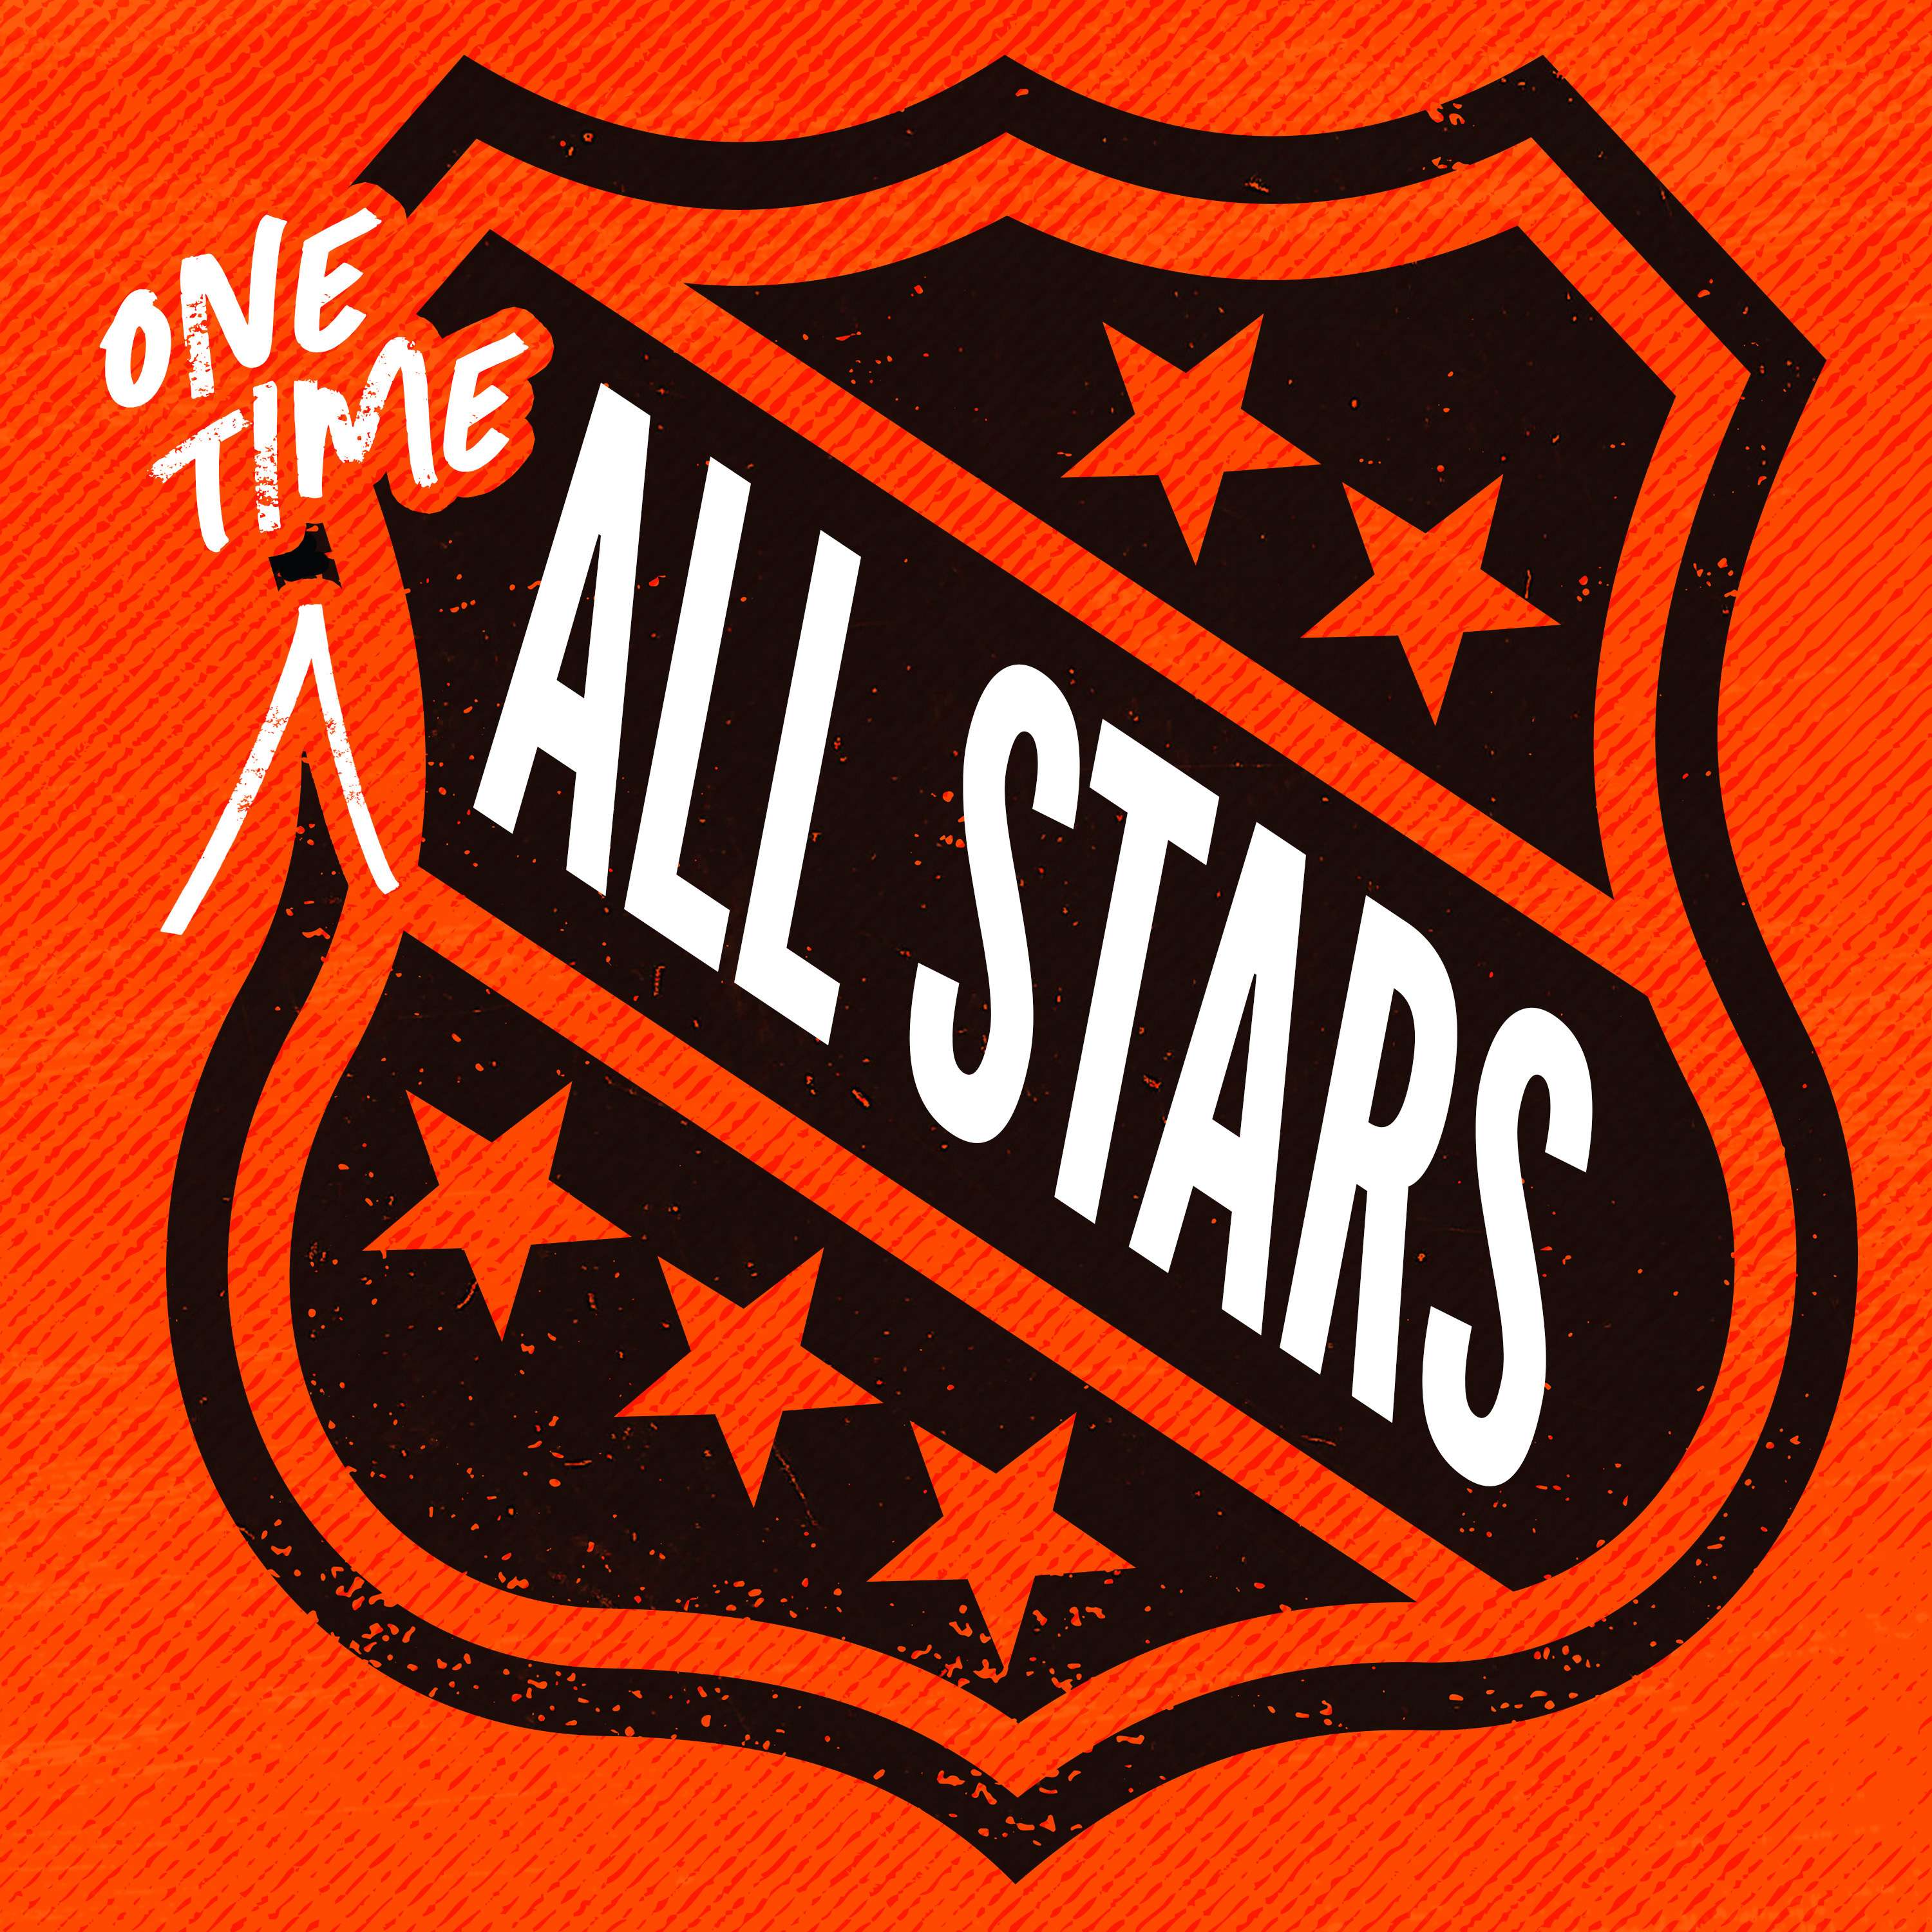 One Time All Stars